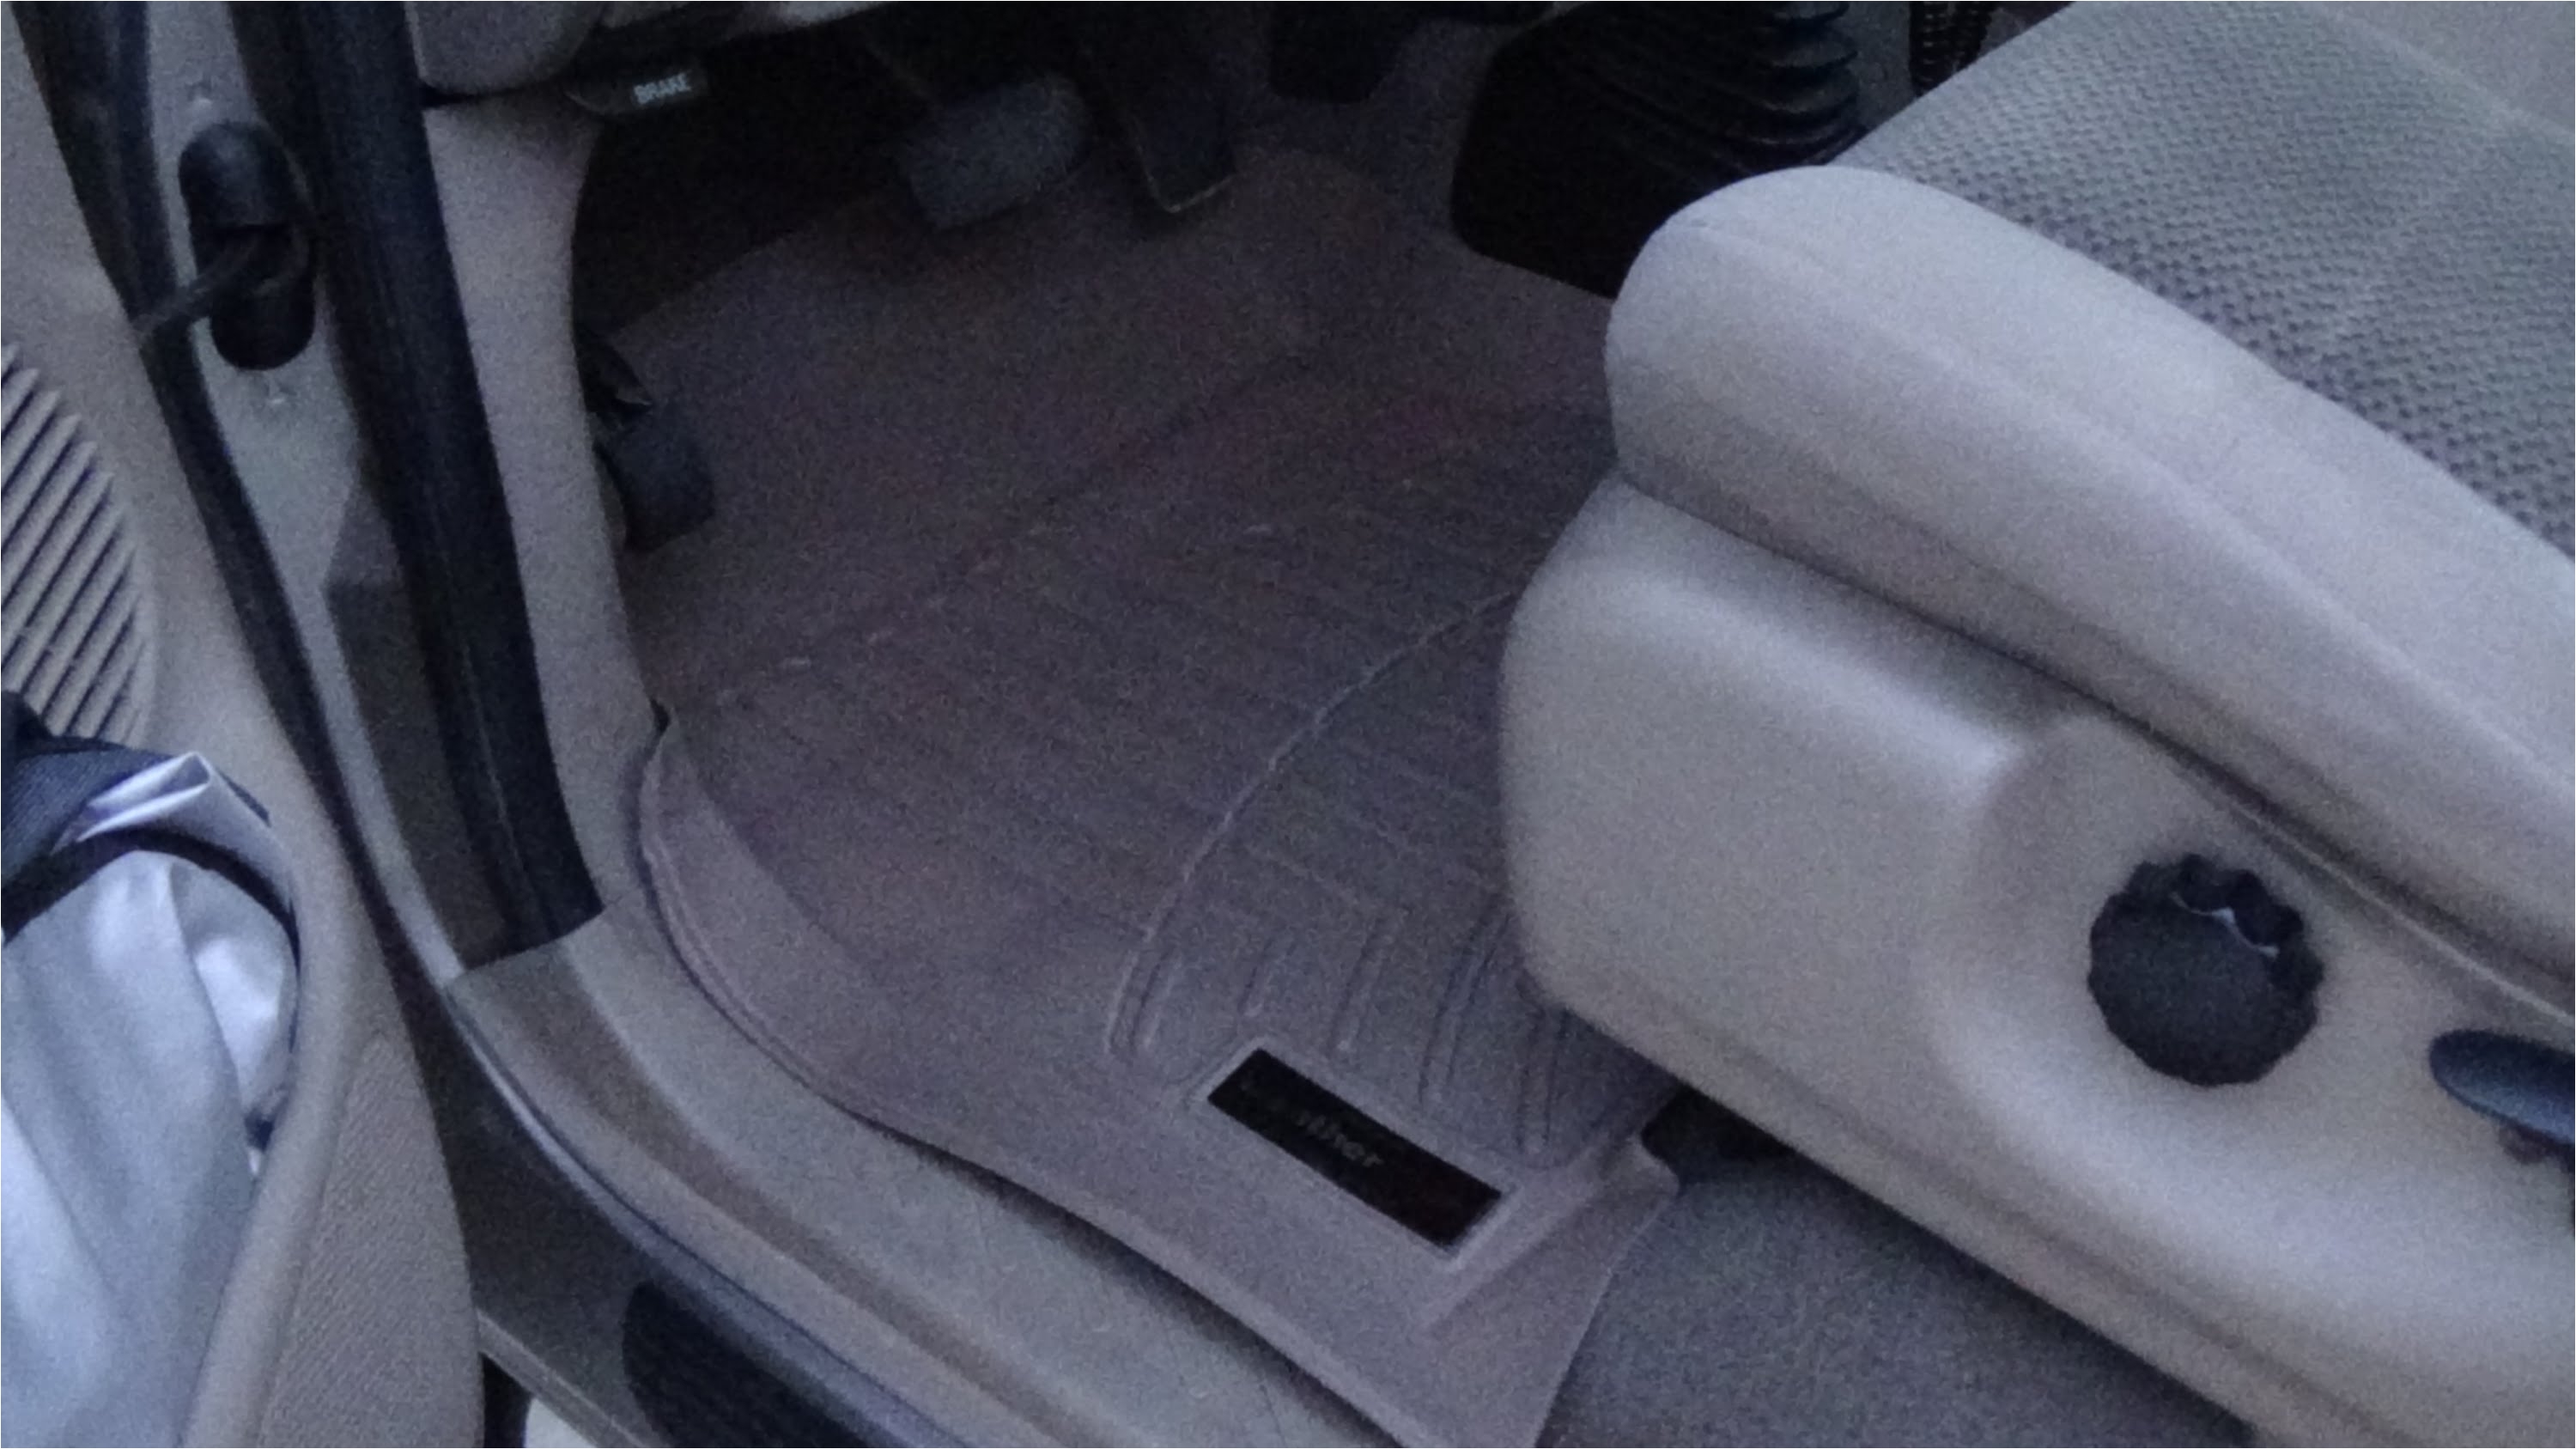 Rubbermaid Floor Mats Auto Weathertech ford F150 Floor Liner Install and Review Youtube